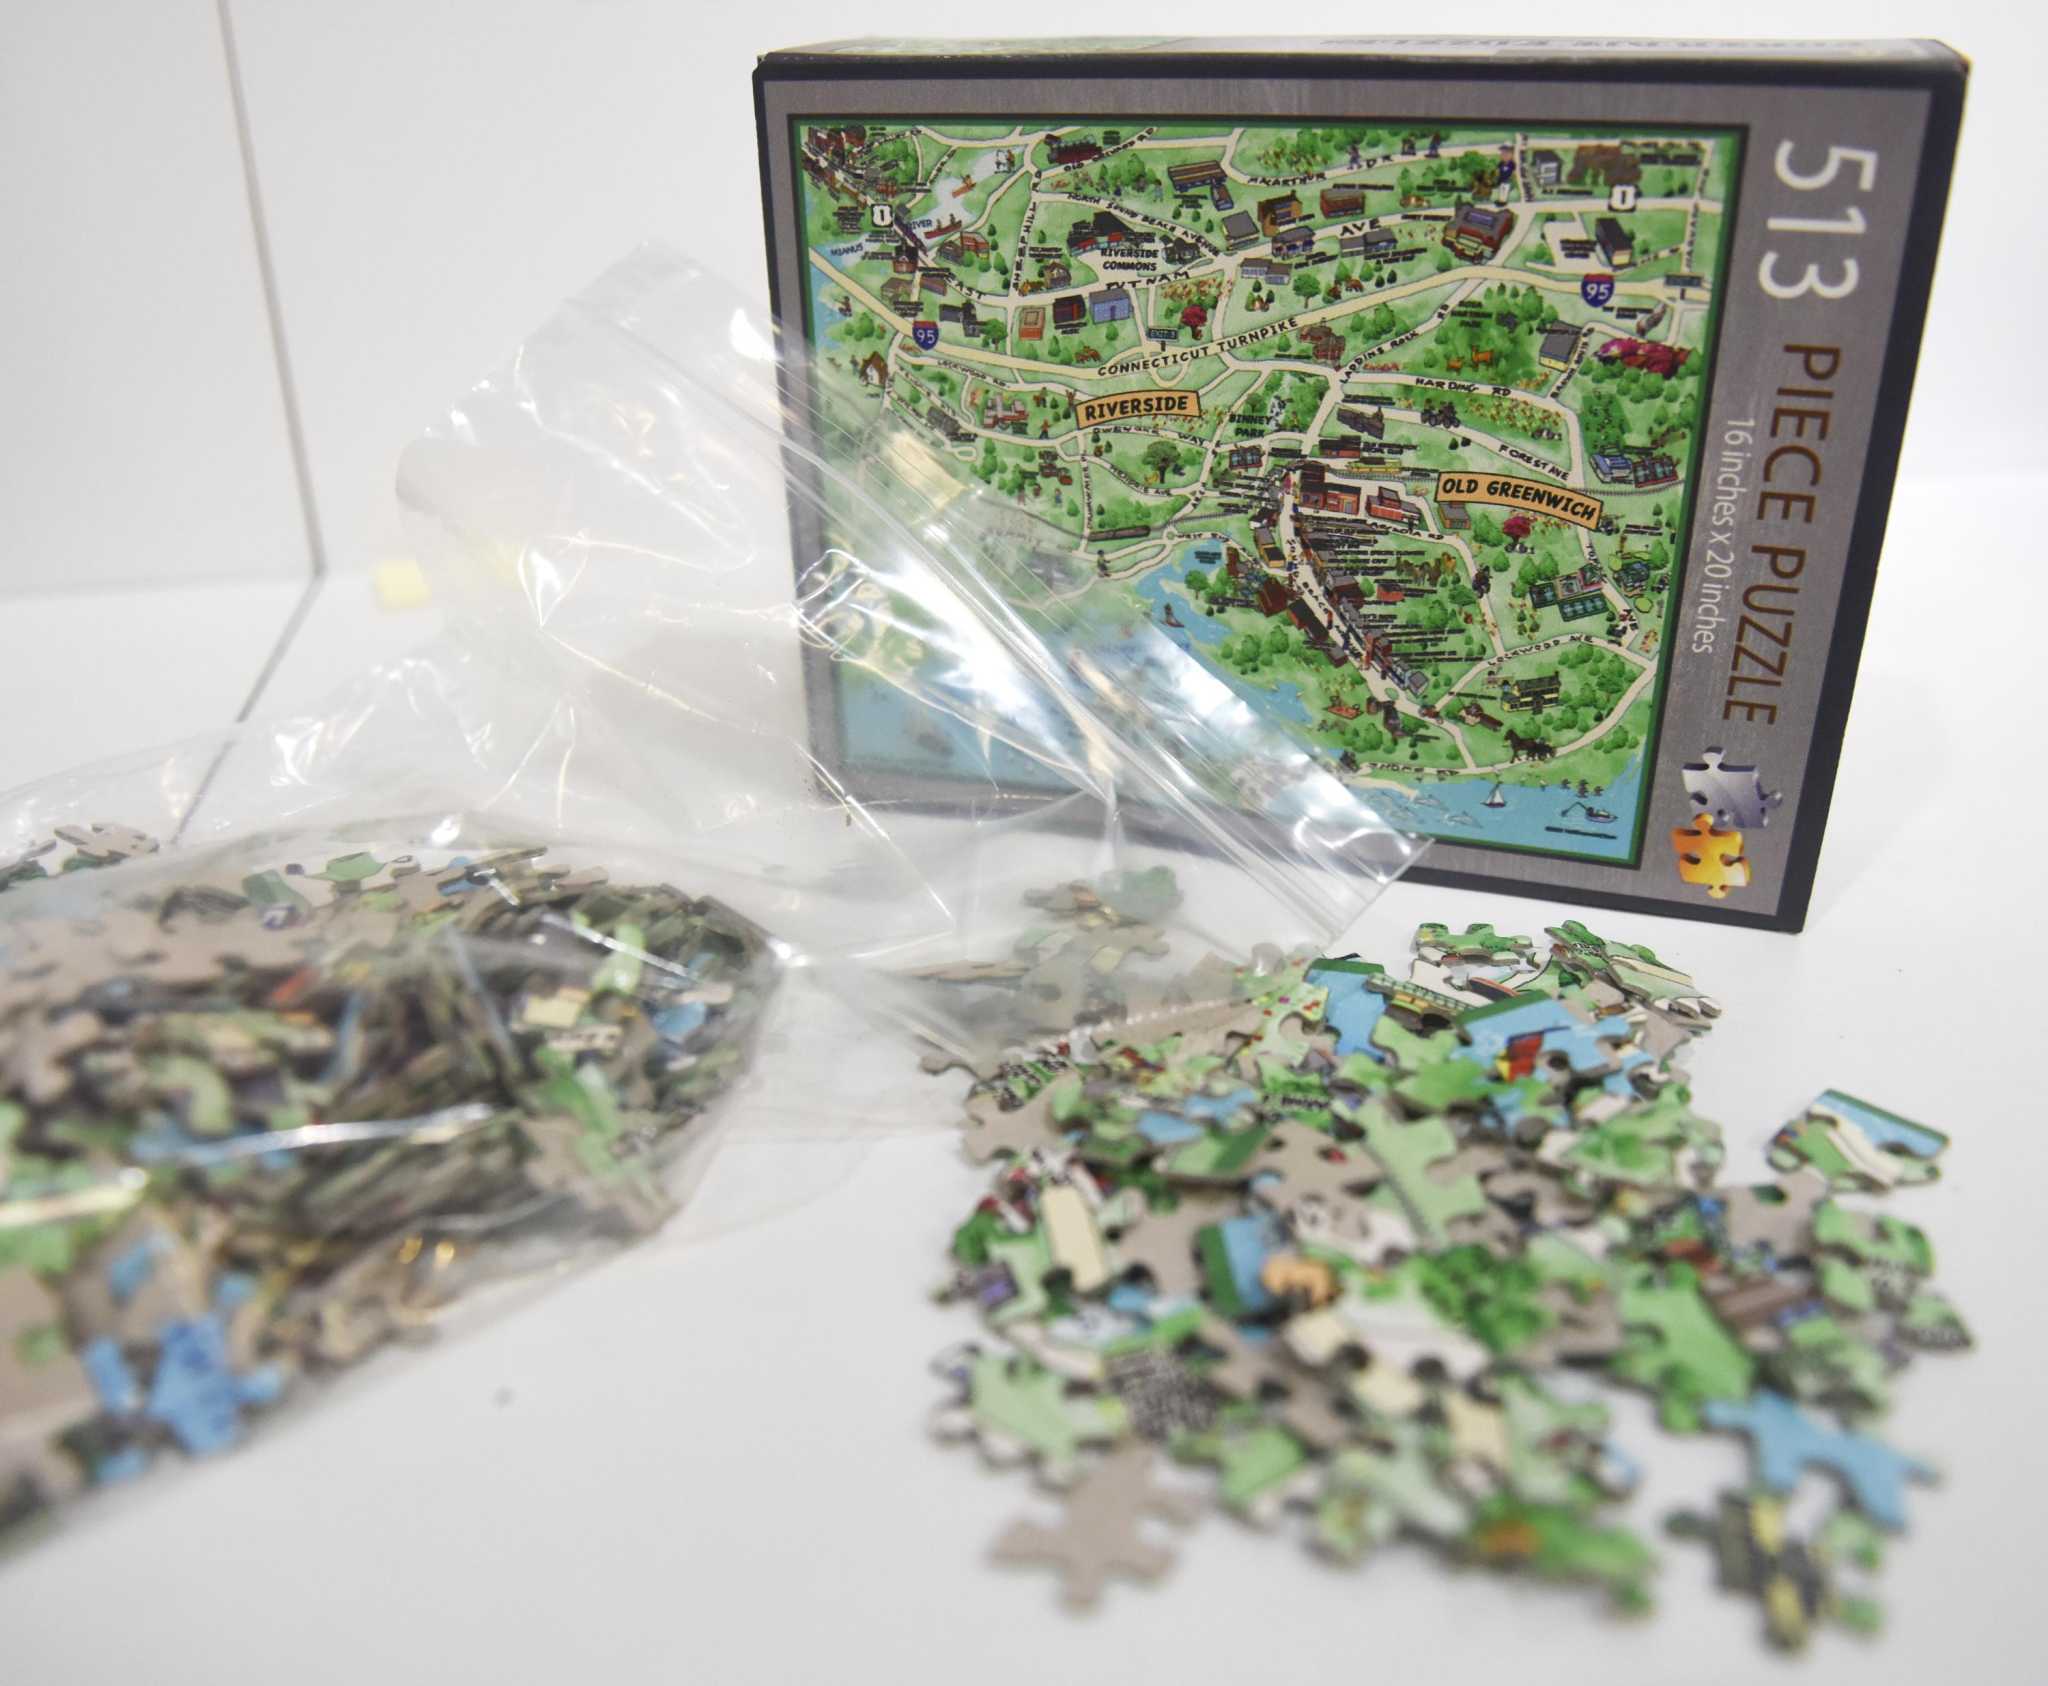 Find Your Way Around Greenwich One Piece At A Time With New Hometown Puzzles